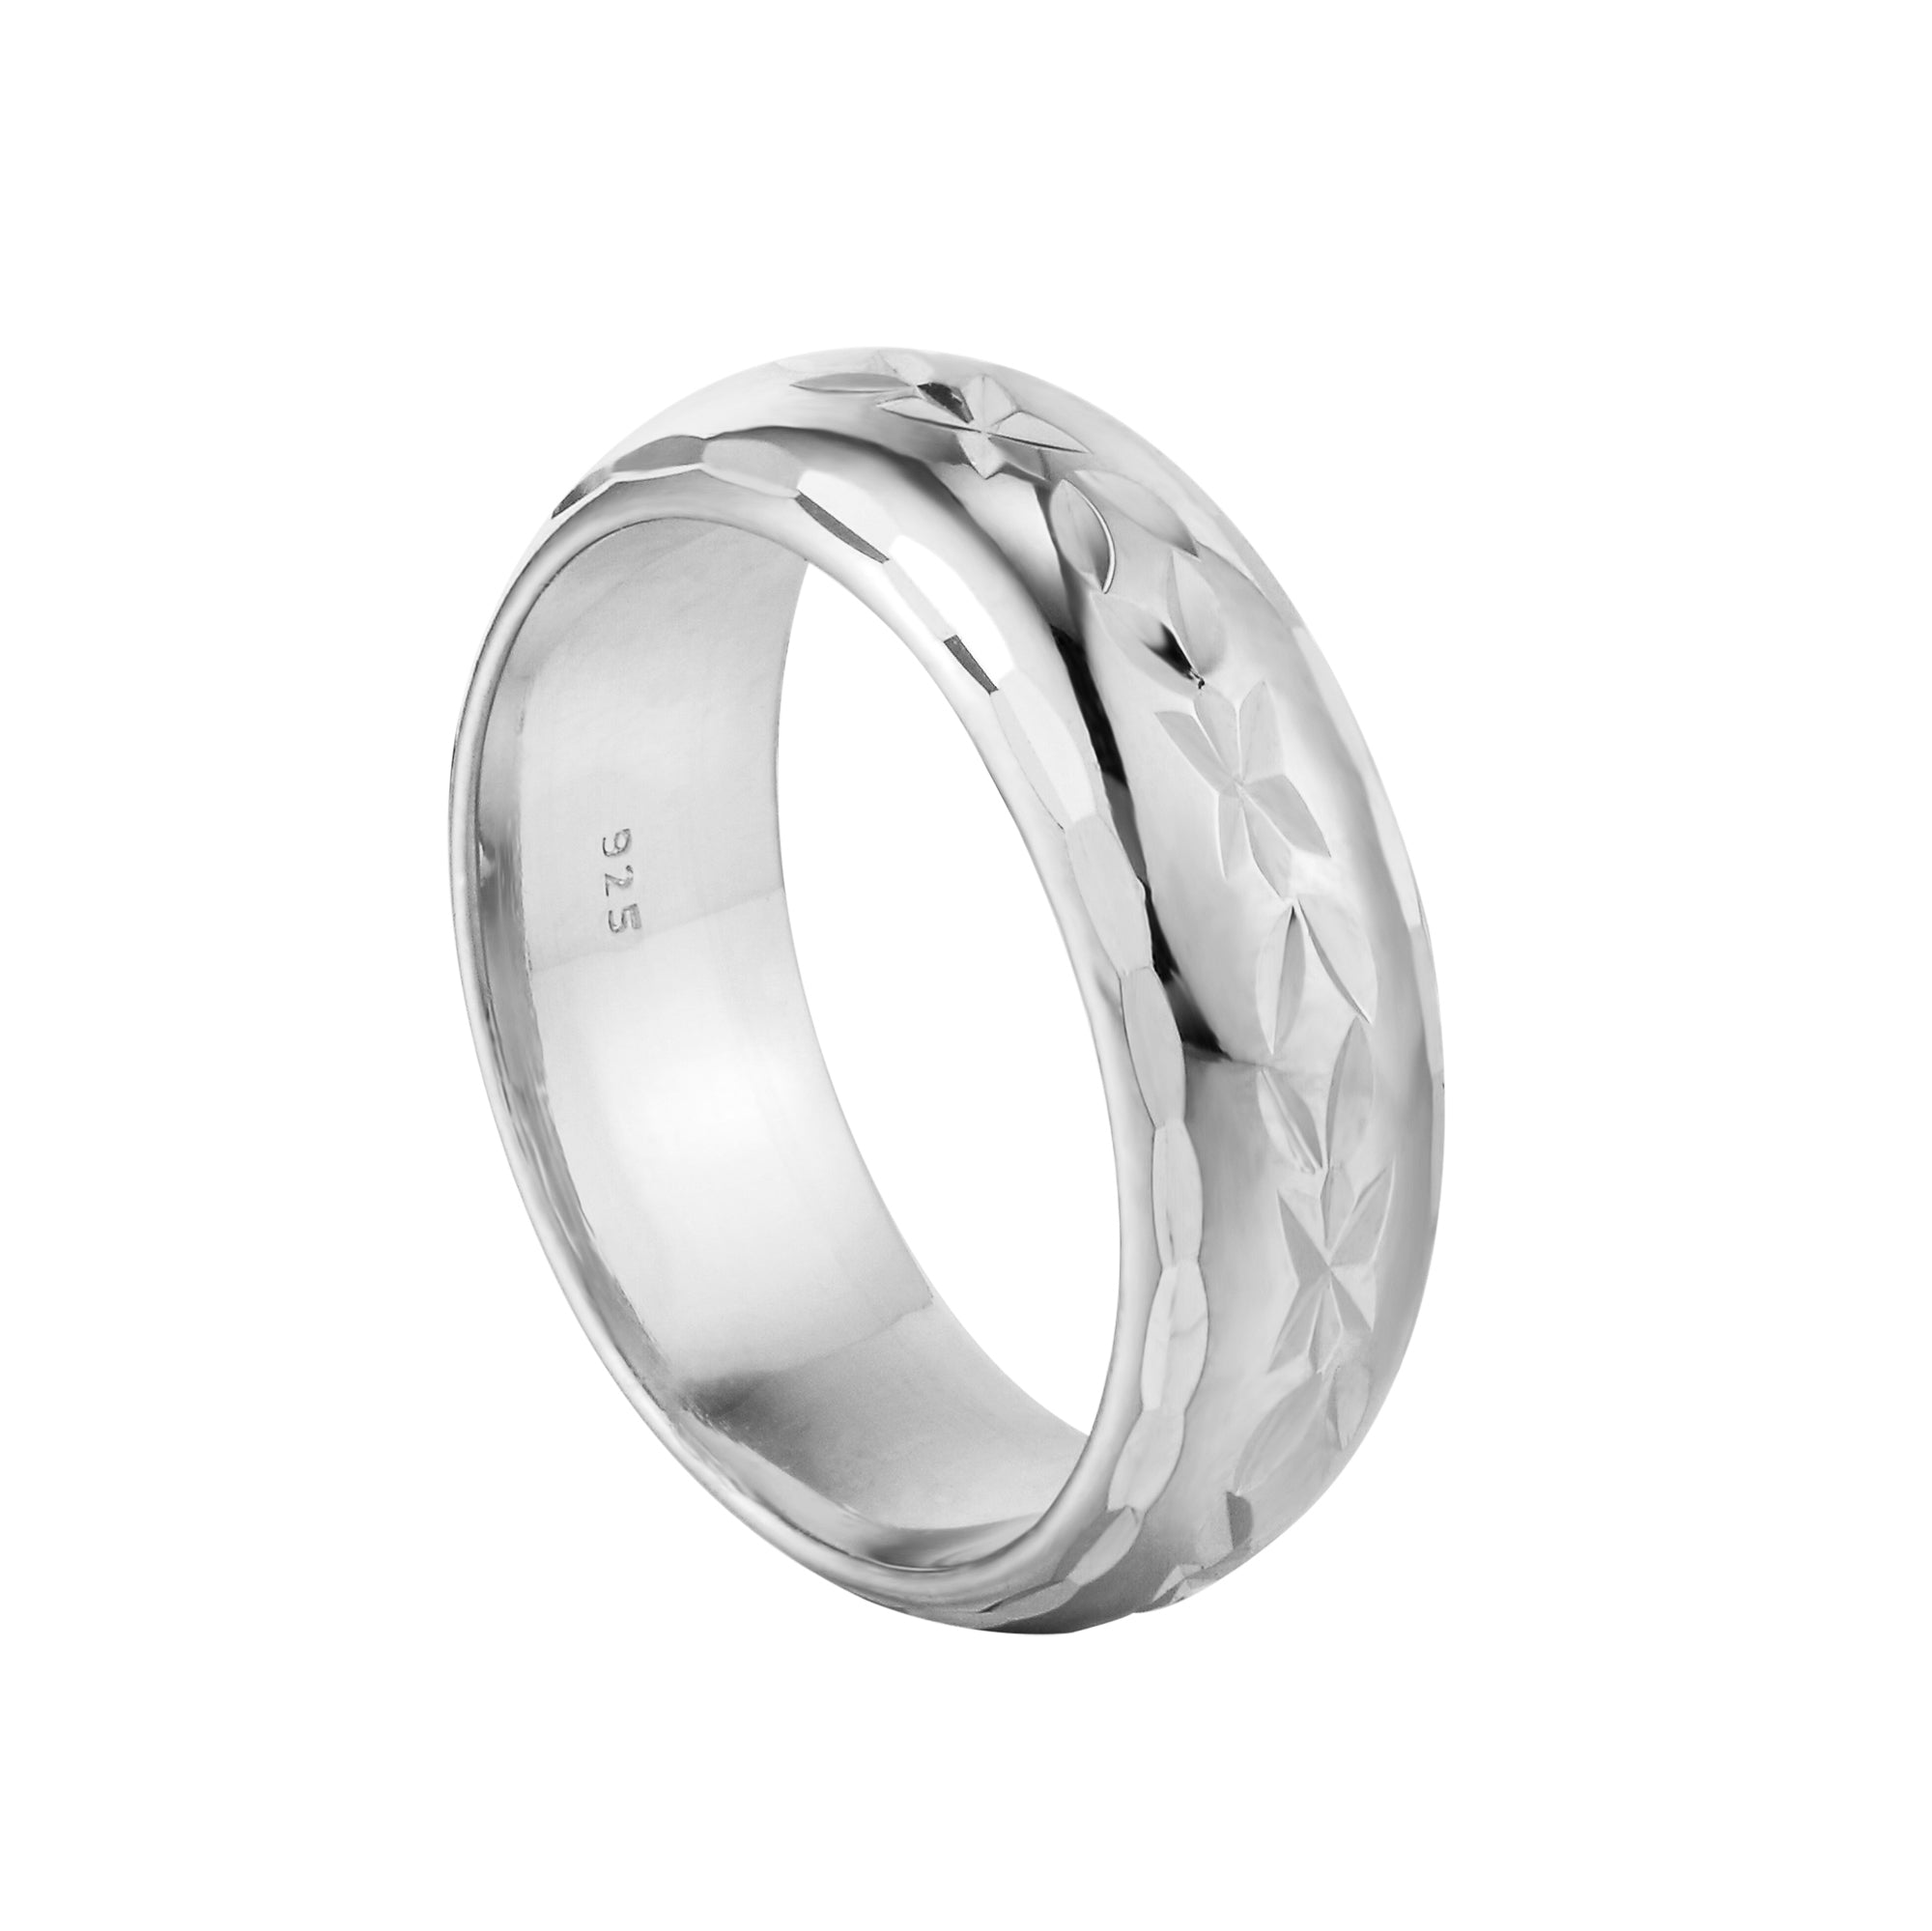 engraved ring - seolgold